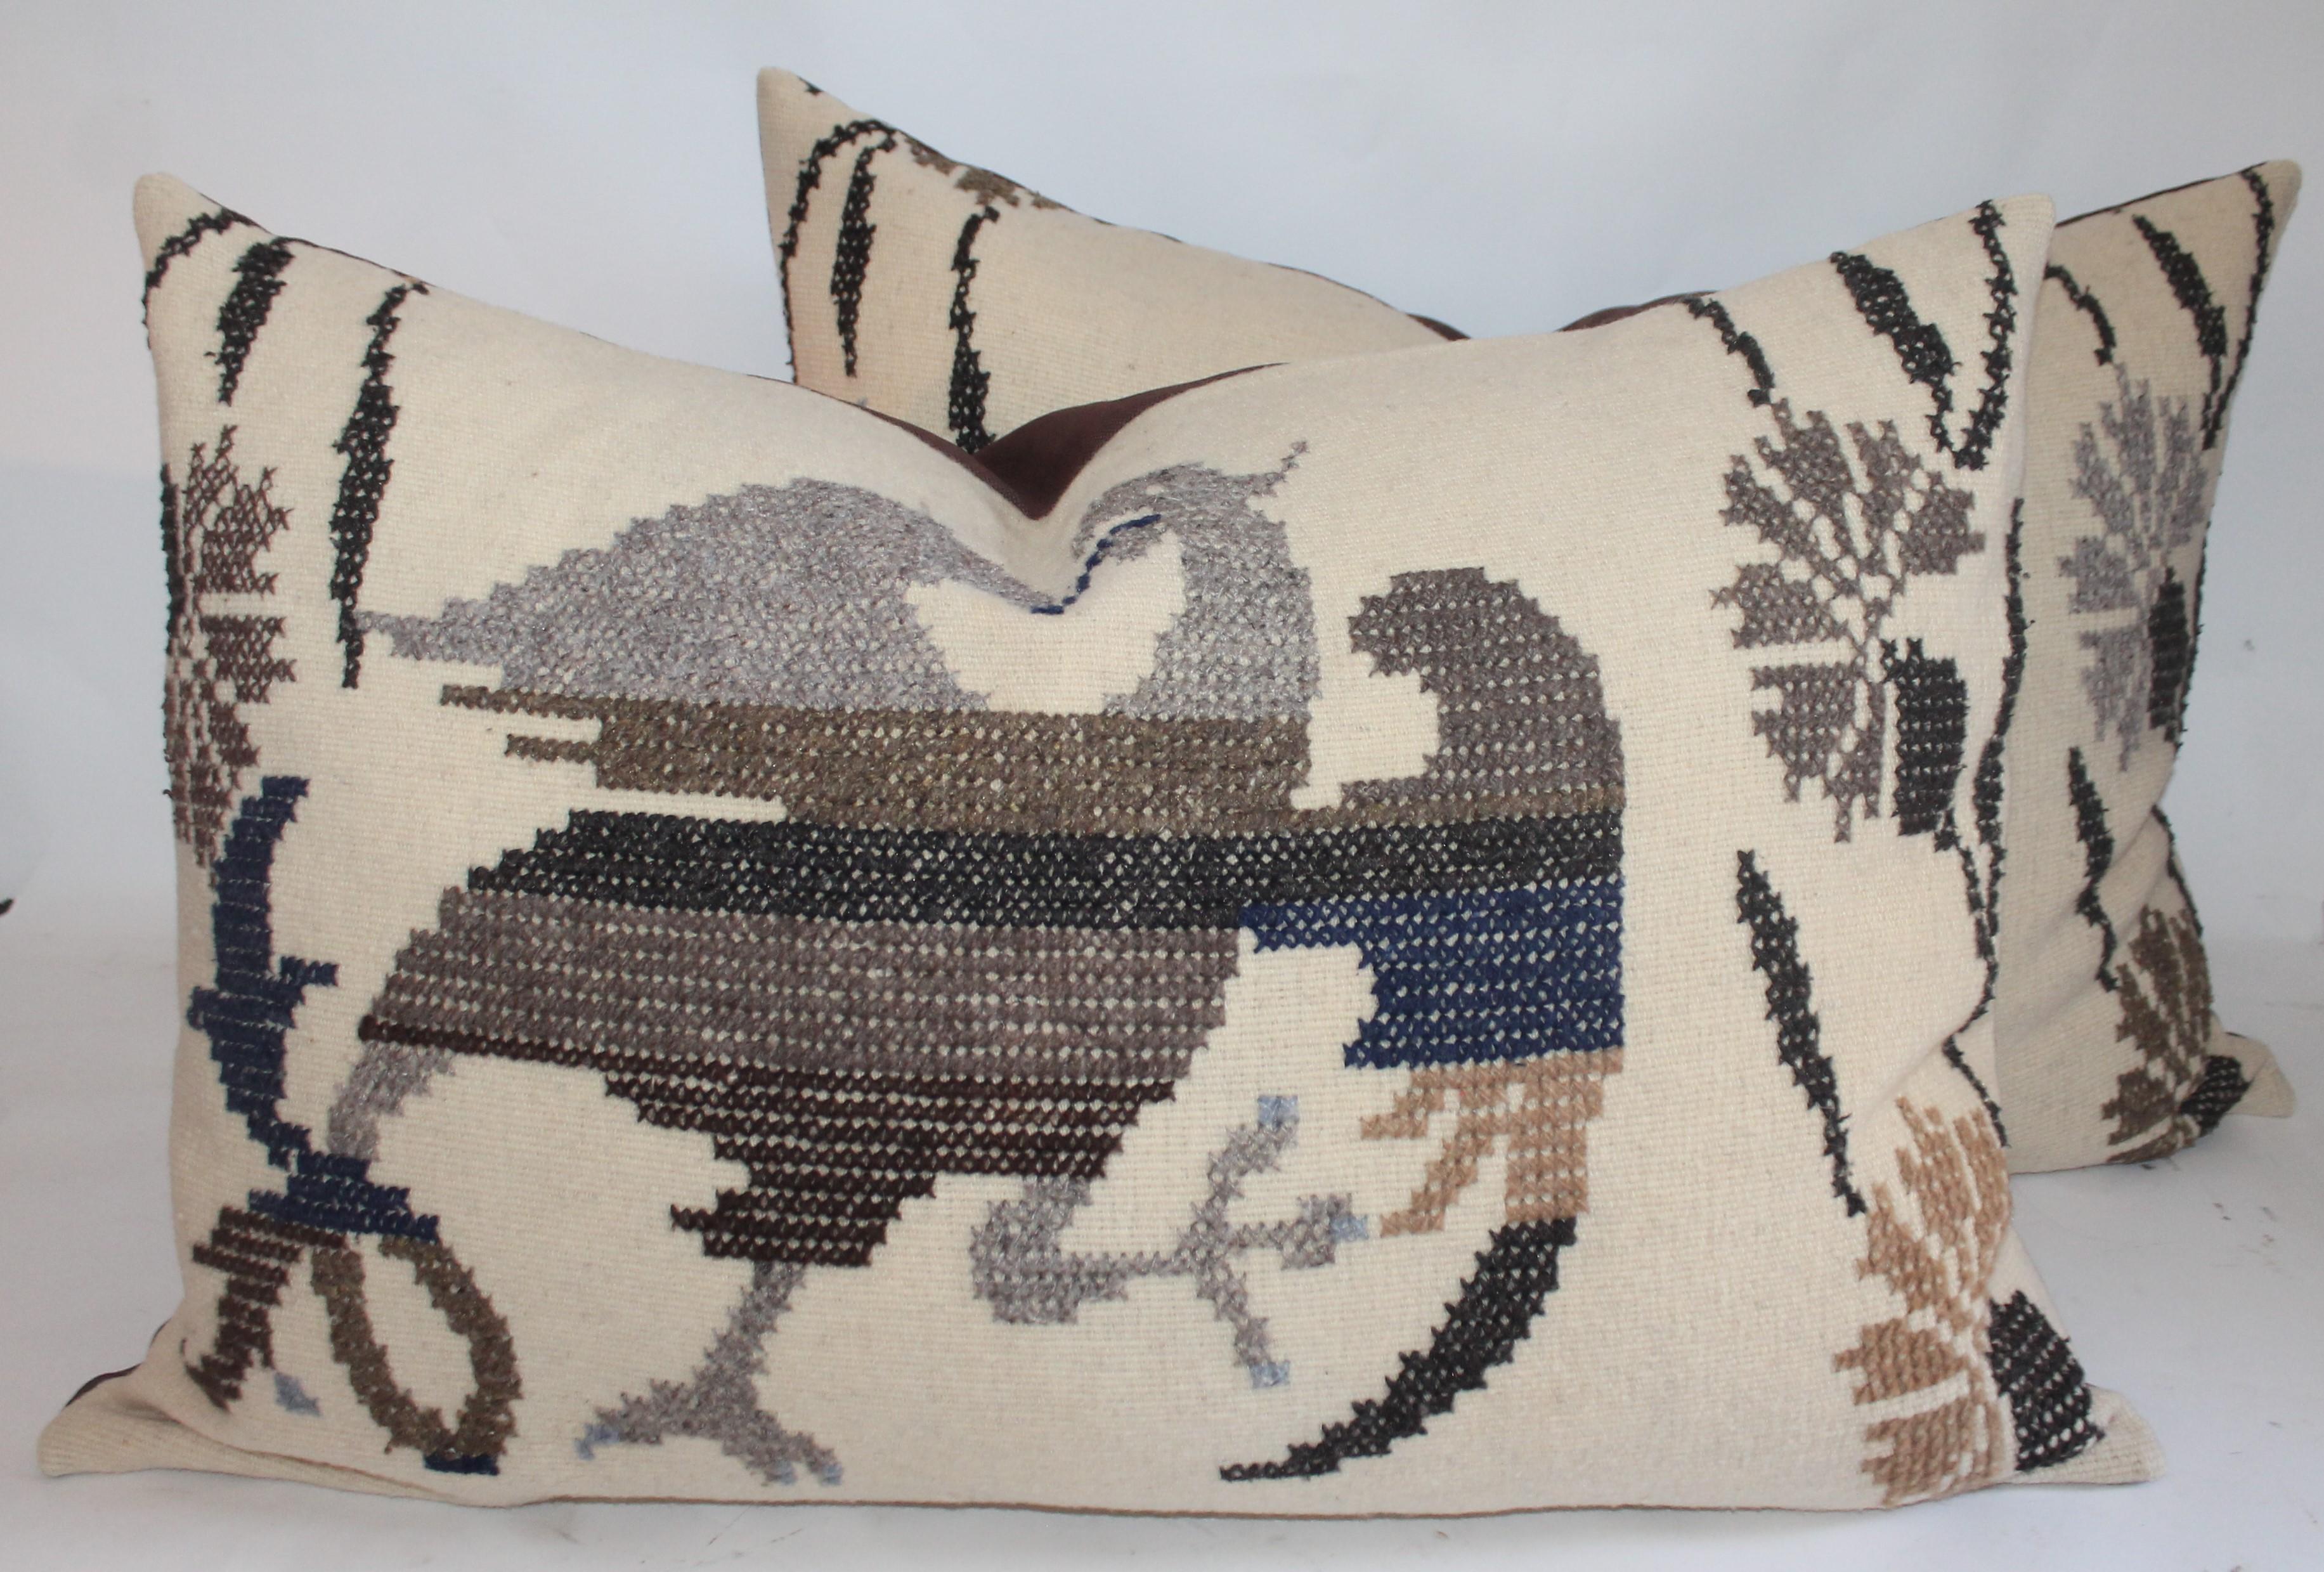 This early weaving has embroidered eagle on linen. There are two pillows matching but sold individually. They can be sold as a matching pair for 1495. For the pair.